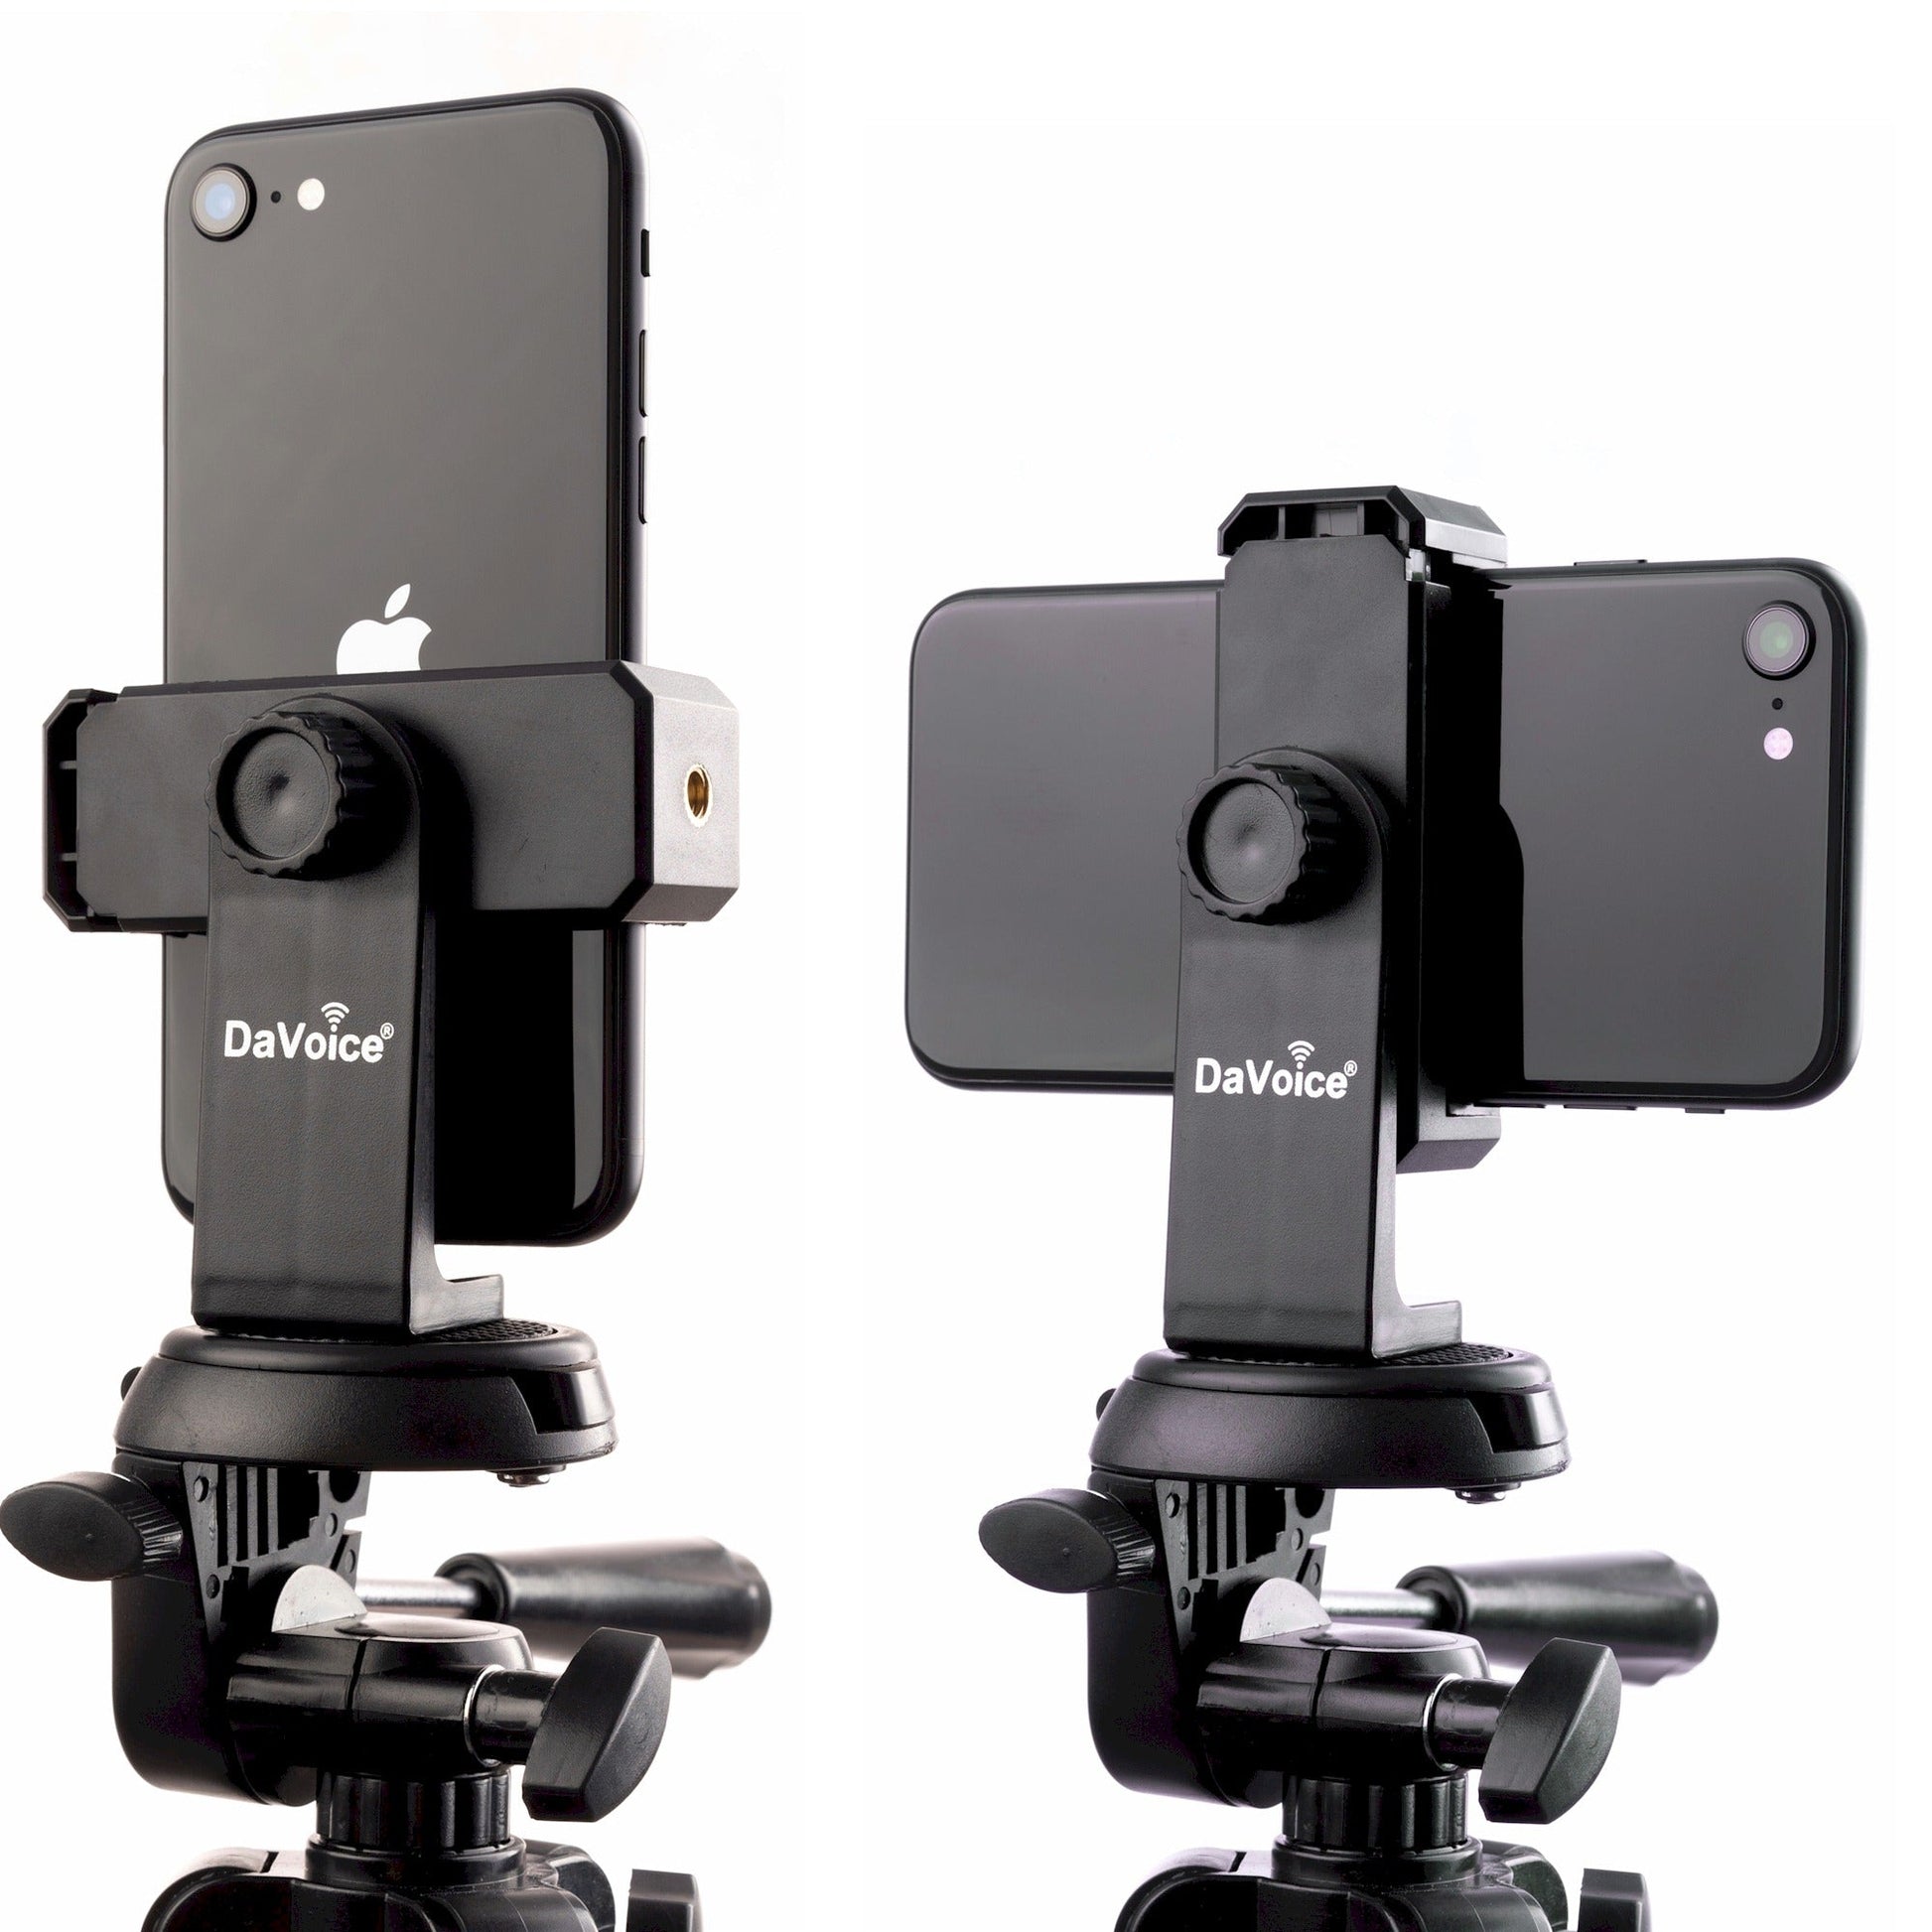 iPhone Tripods